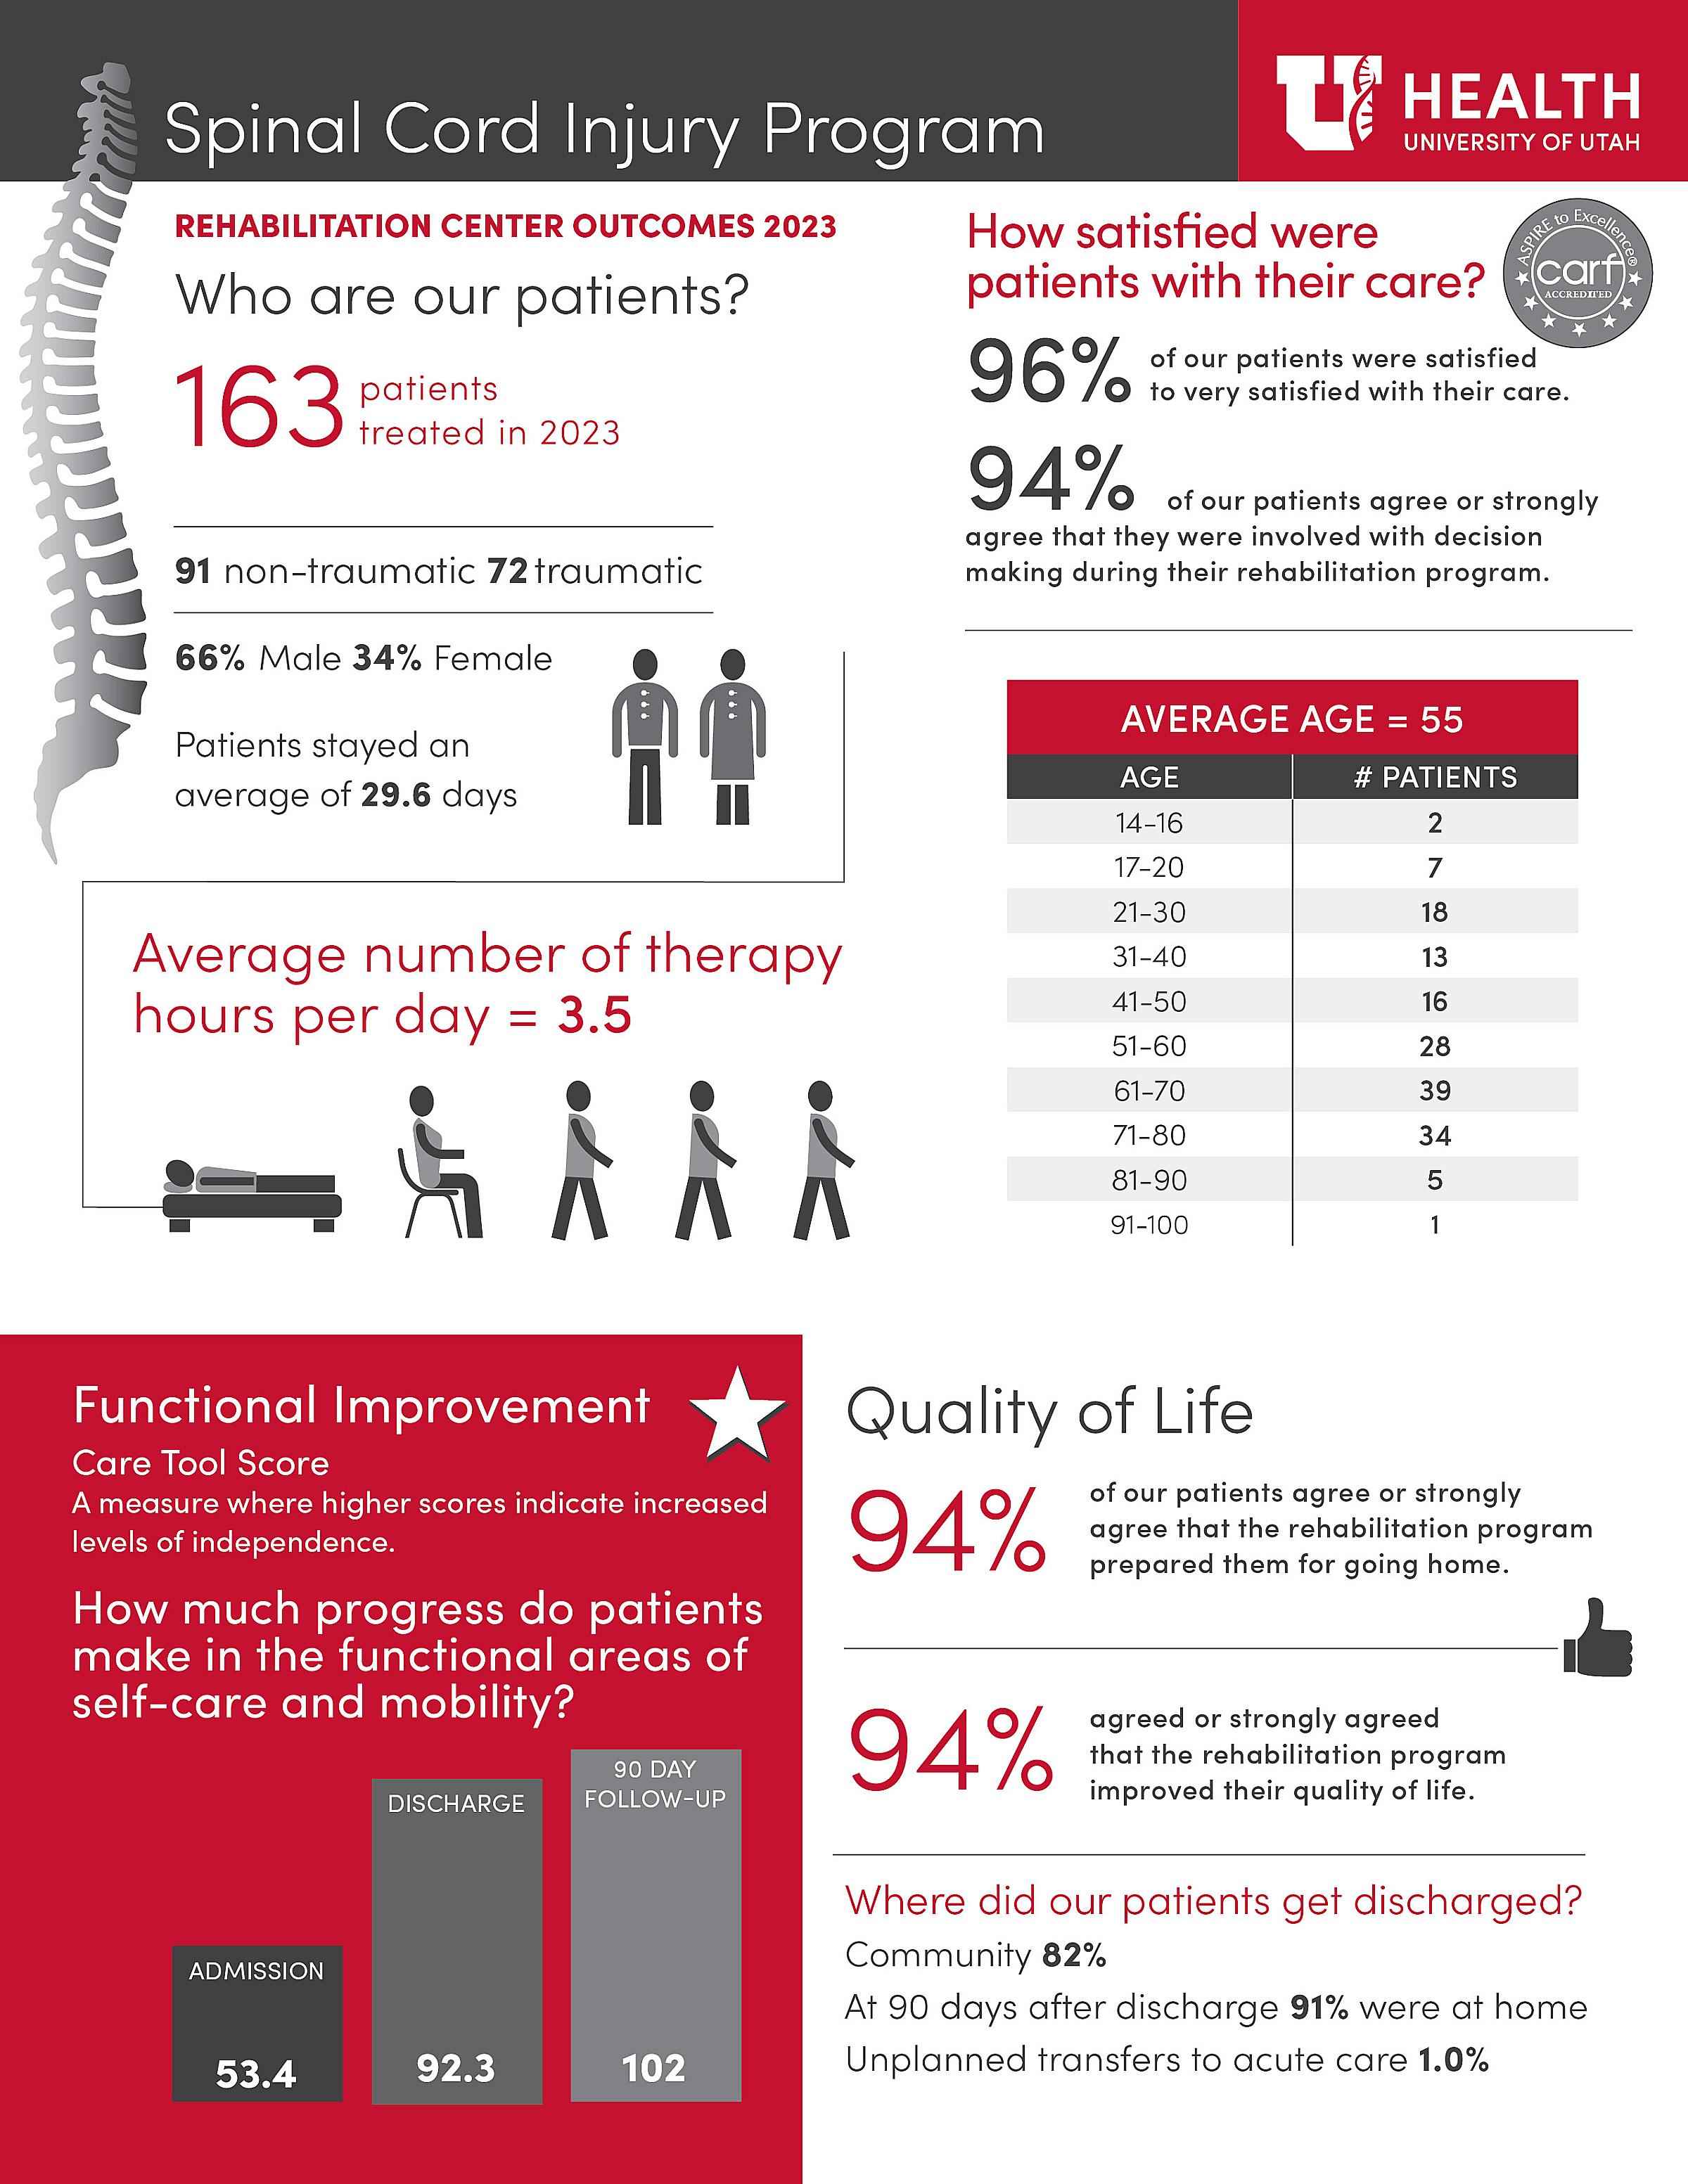 A data summary that shows the progress of patients who received spinal cord injury treatment at Craig H. Neilsen Rehabilitation Hospital in 2022.